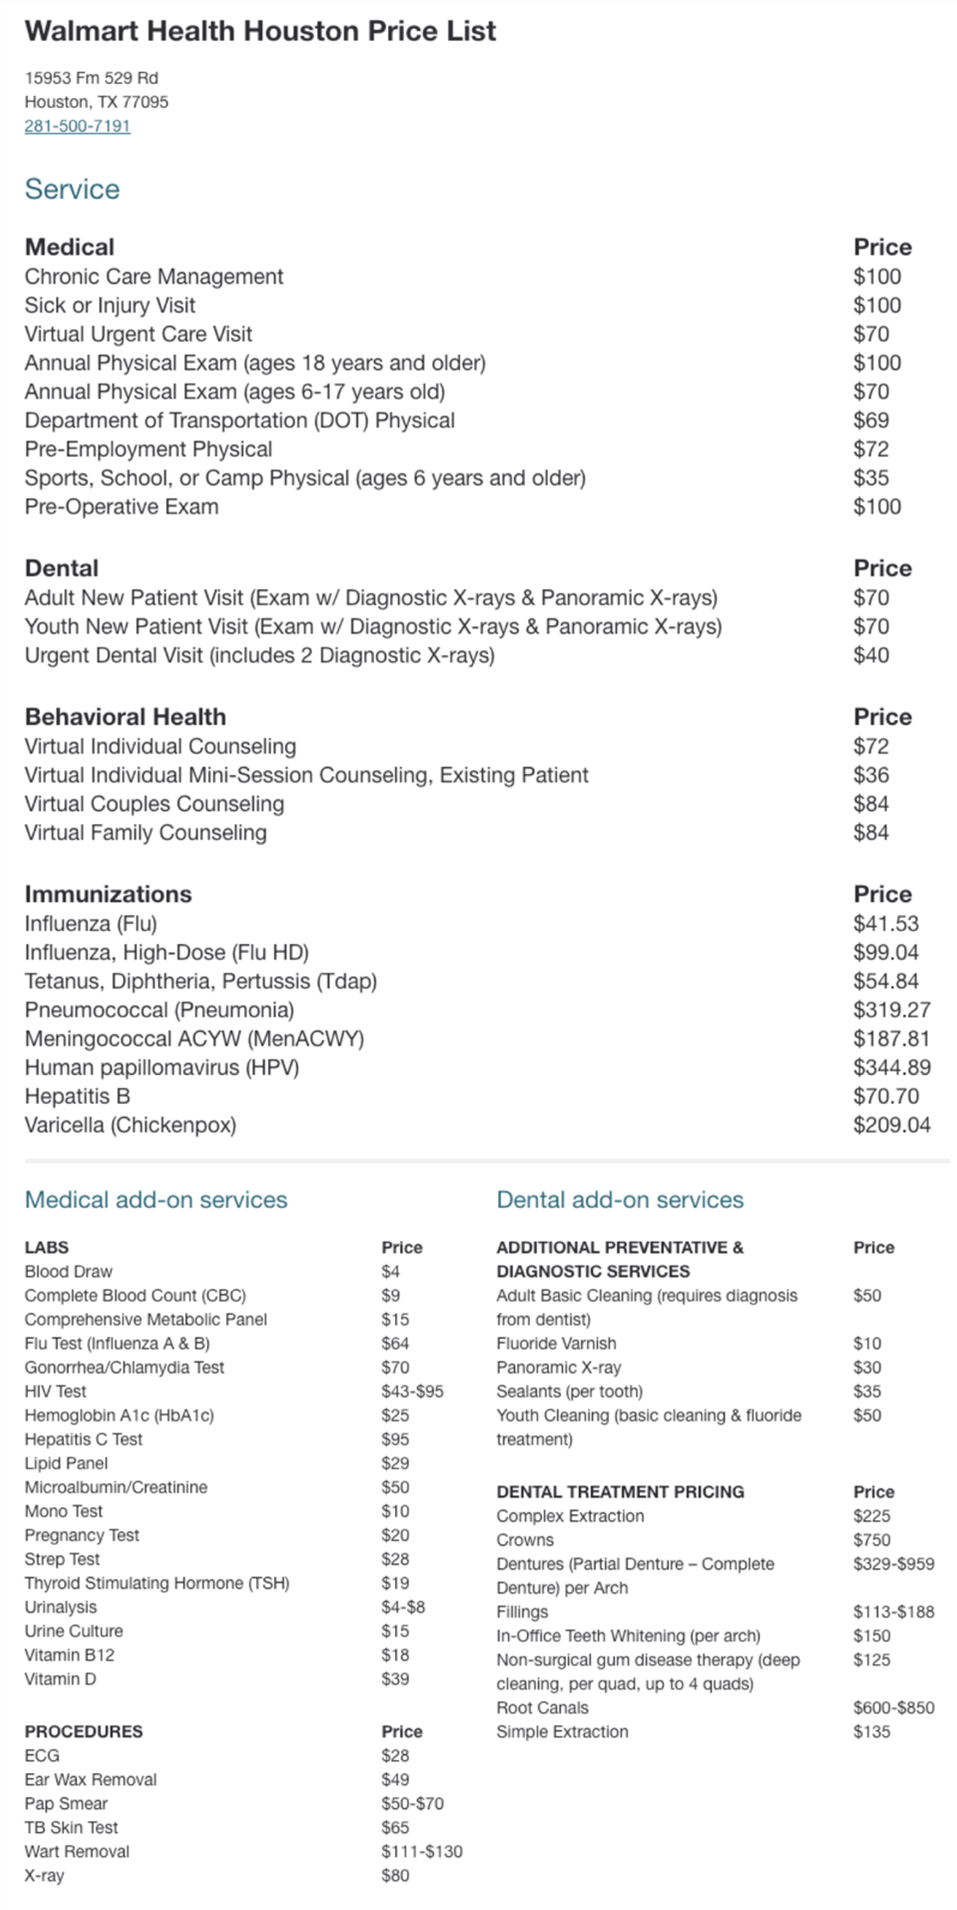 A price list for Walmart Health Houston, showing exact prices for over 50 different procedures, including services for medical, dental, behavioral health, immunization, labs, and scans